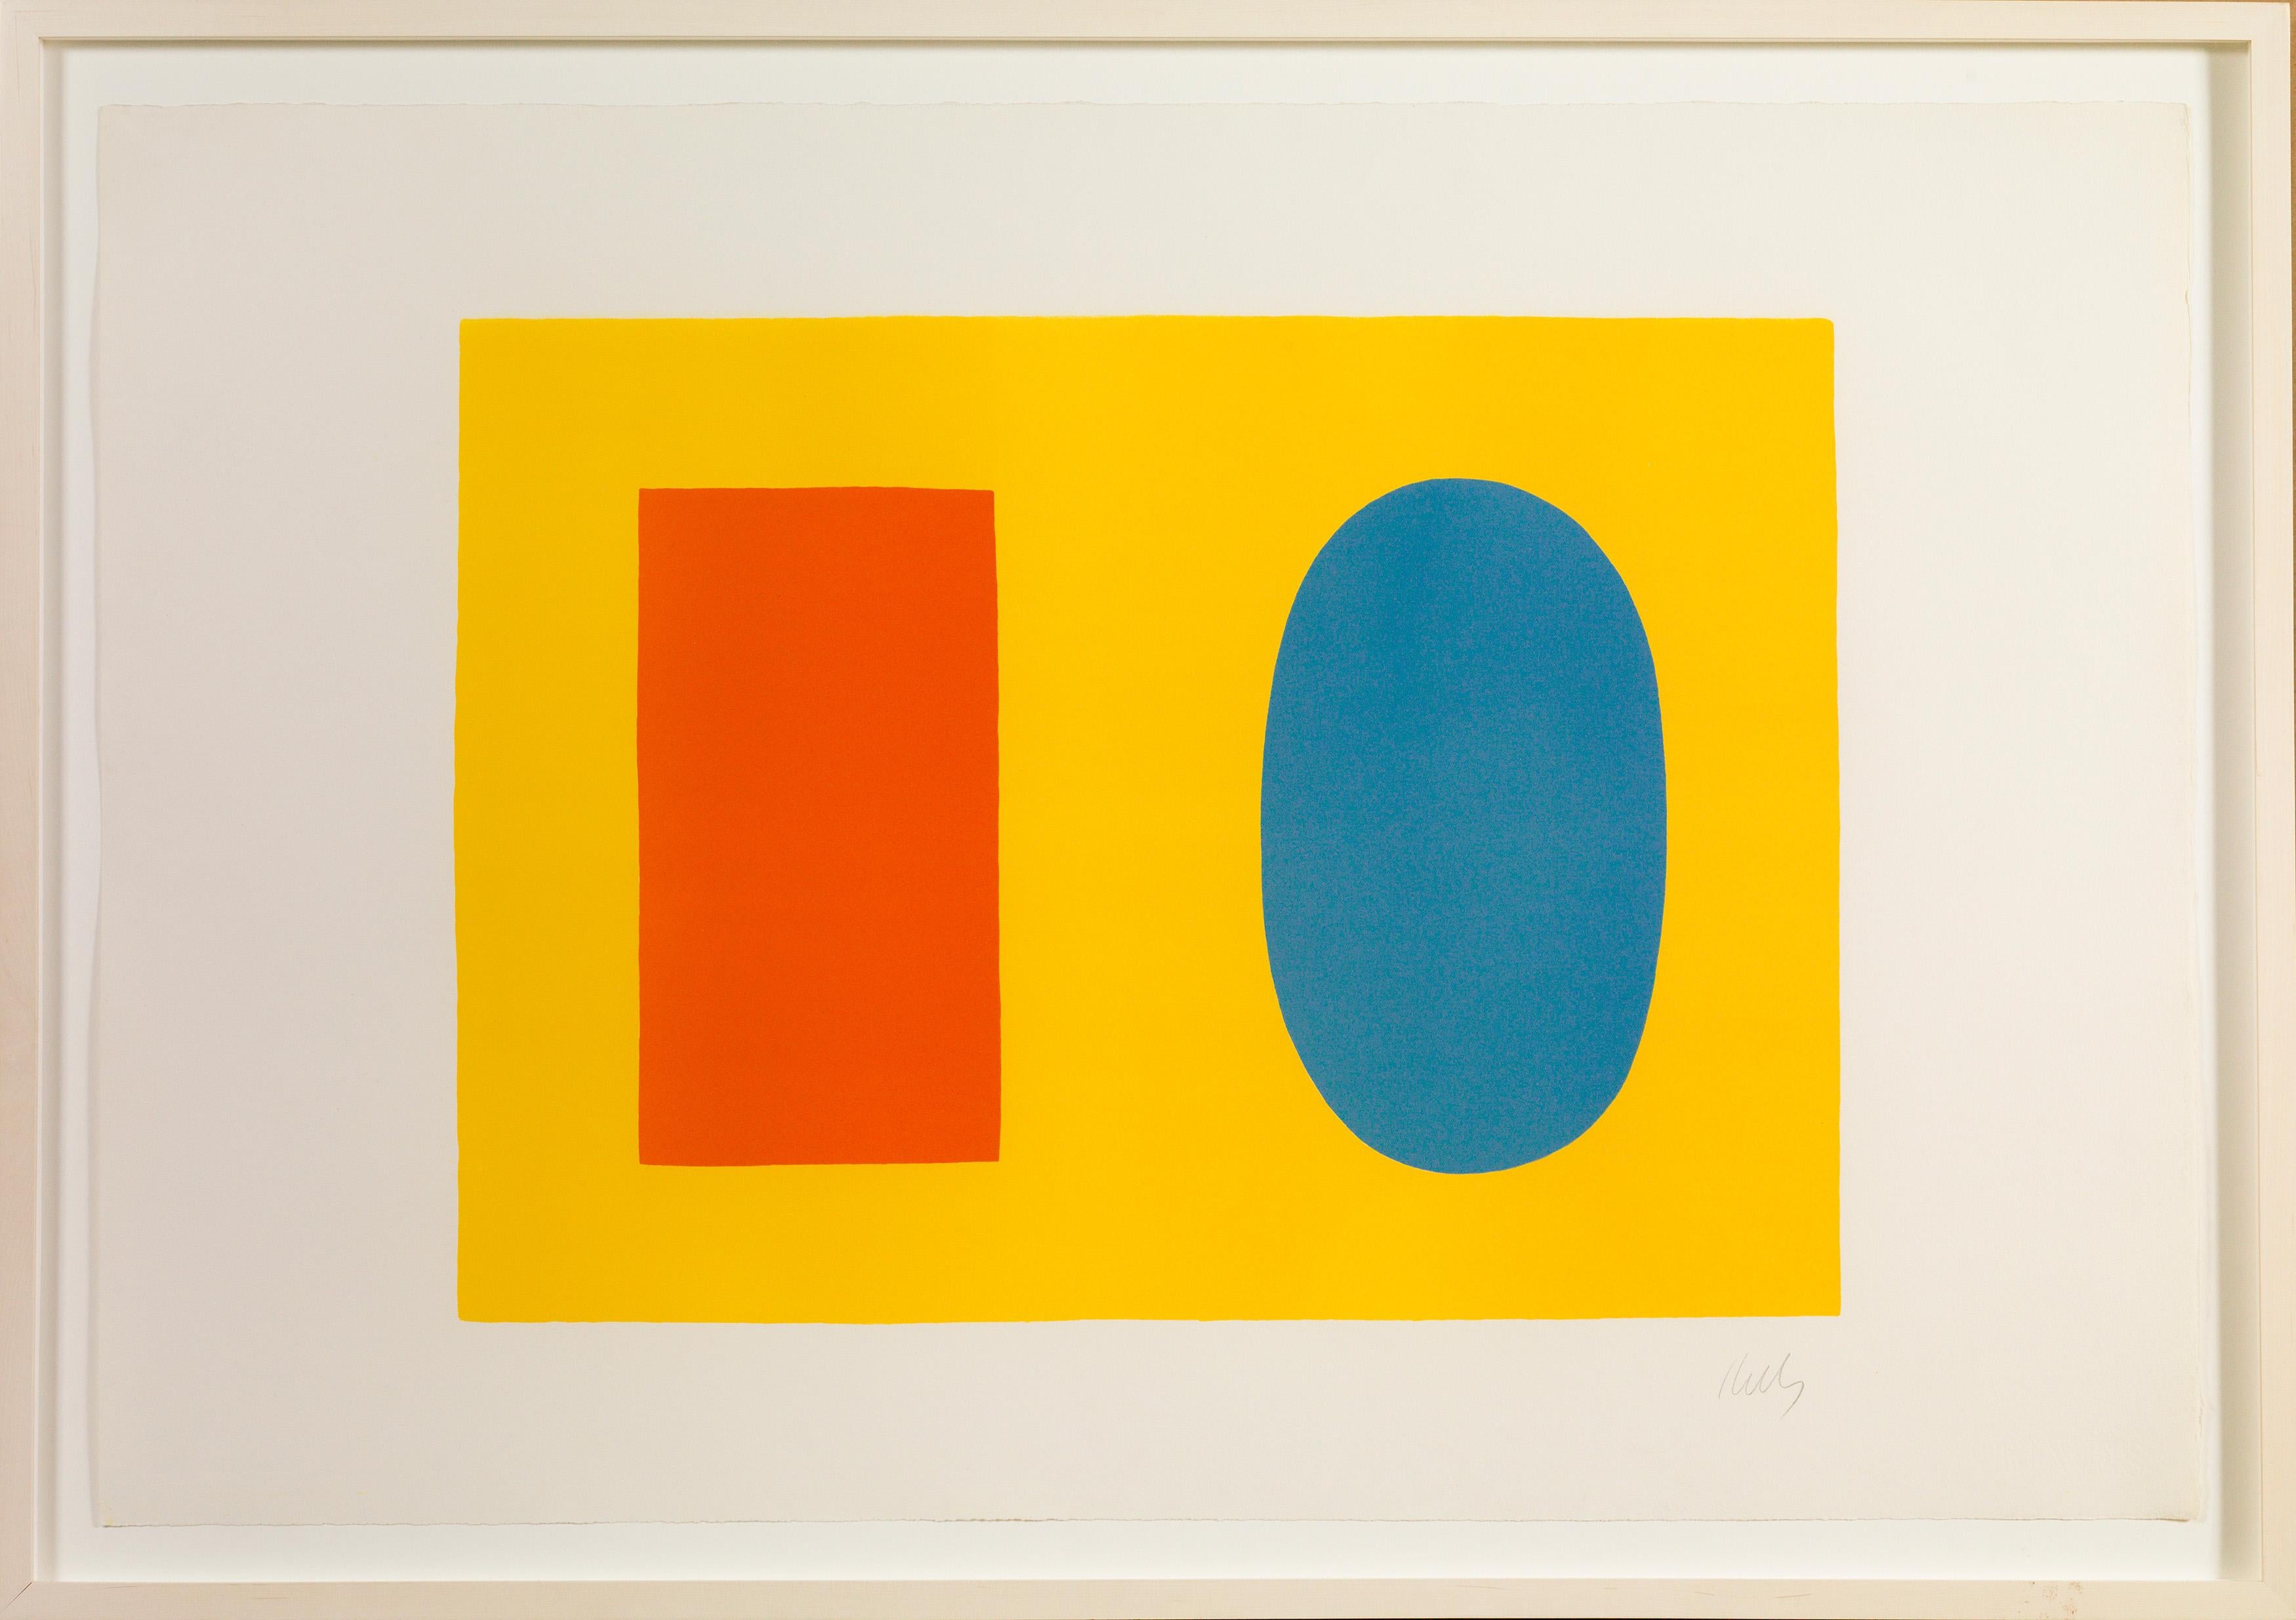 Orange and Blue over Yellow - Print by Ellsworth Kelly